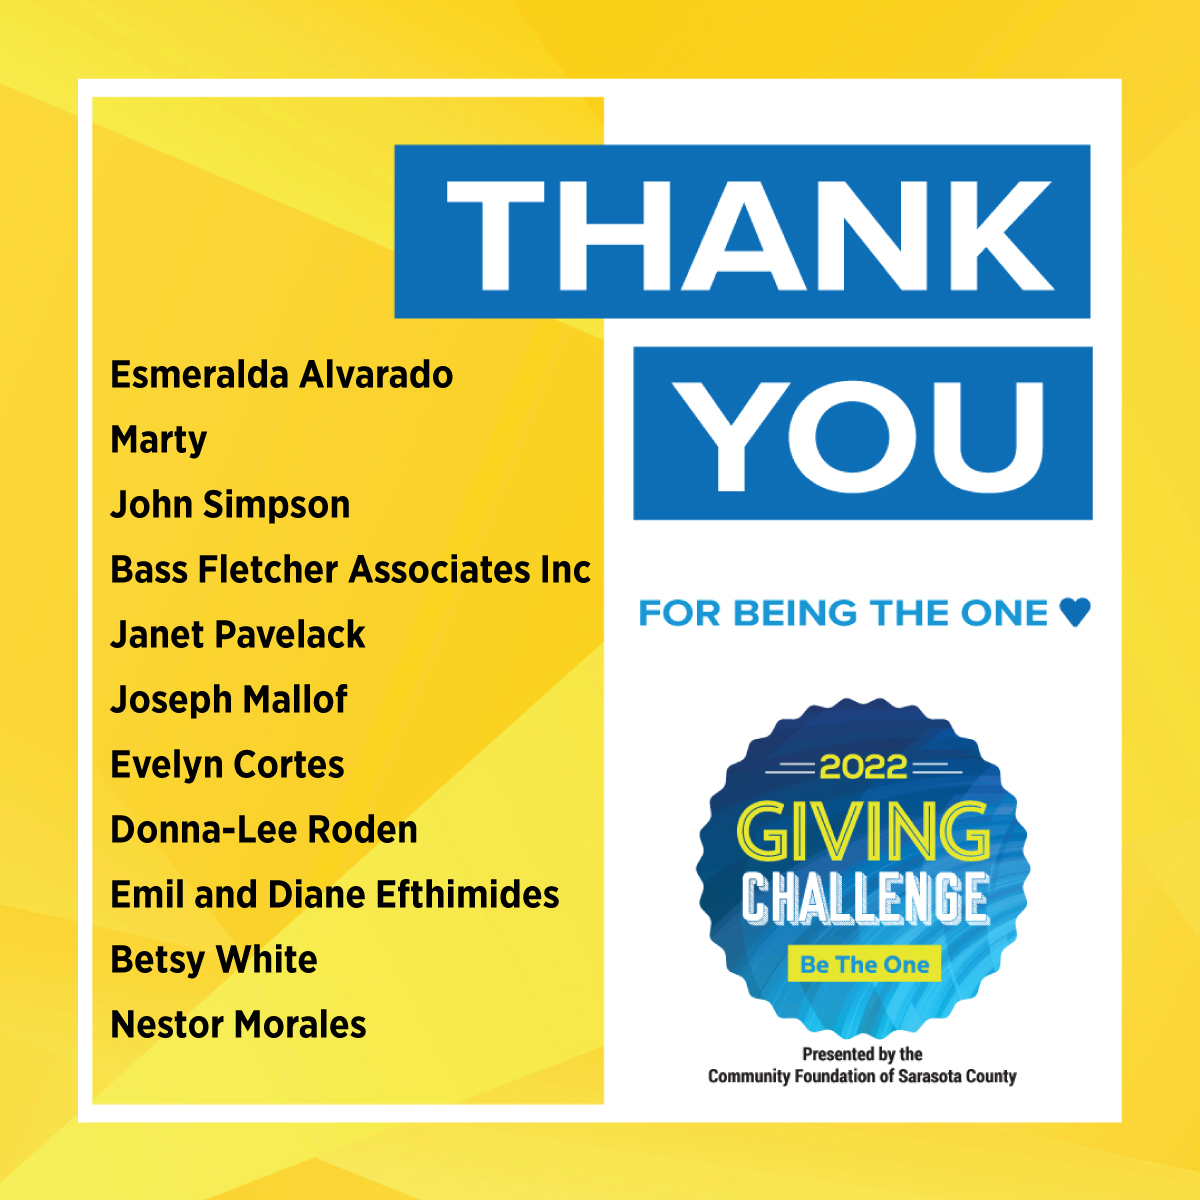 Thank you for being the one!

#GivingChallenge2022 #BeTheOne